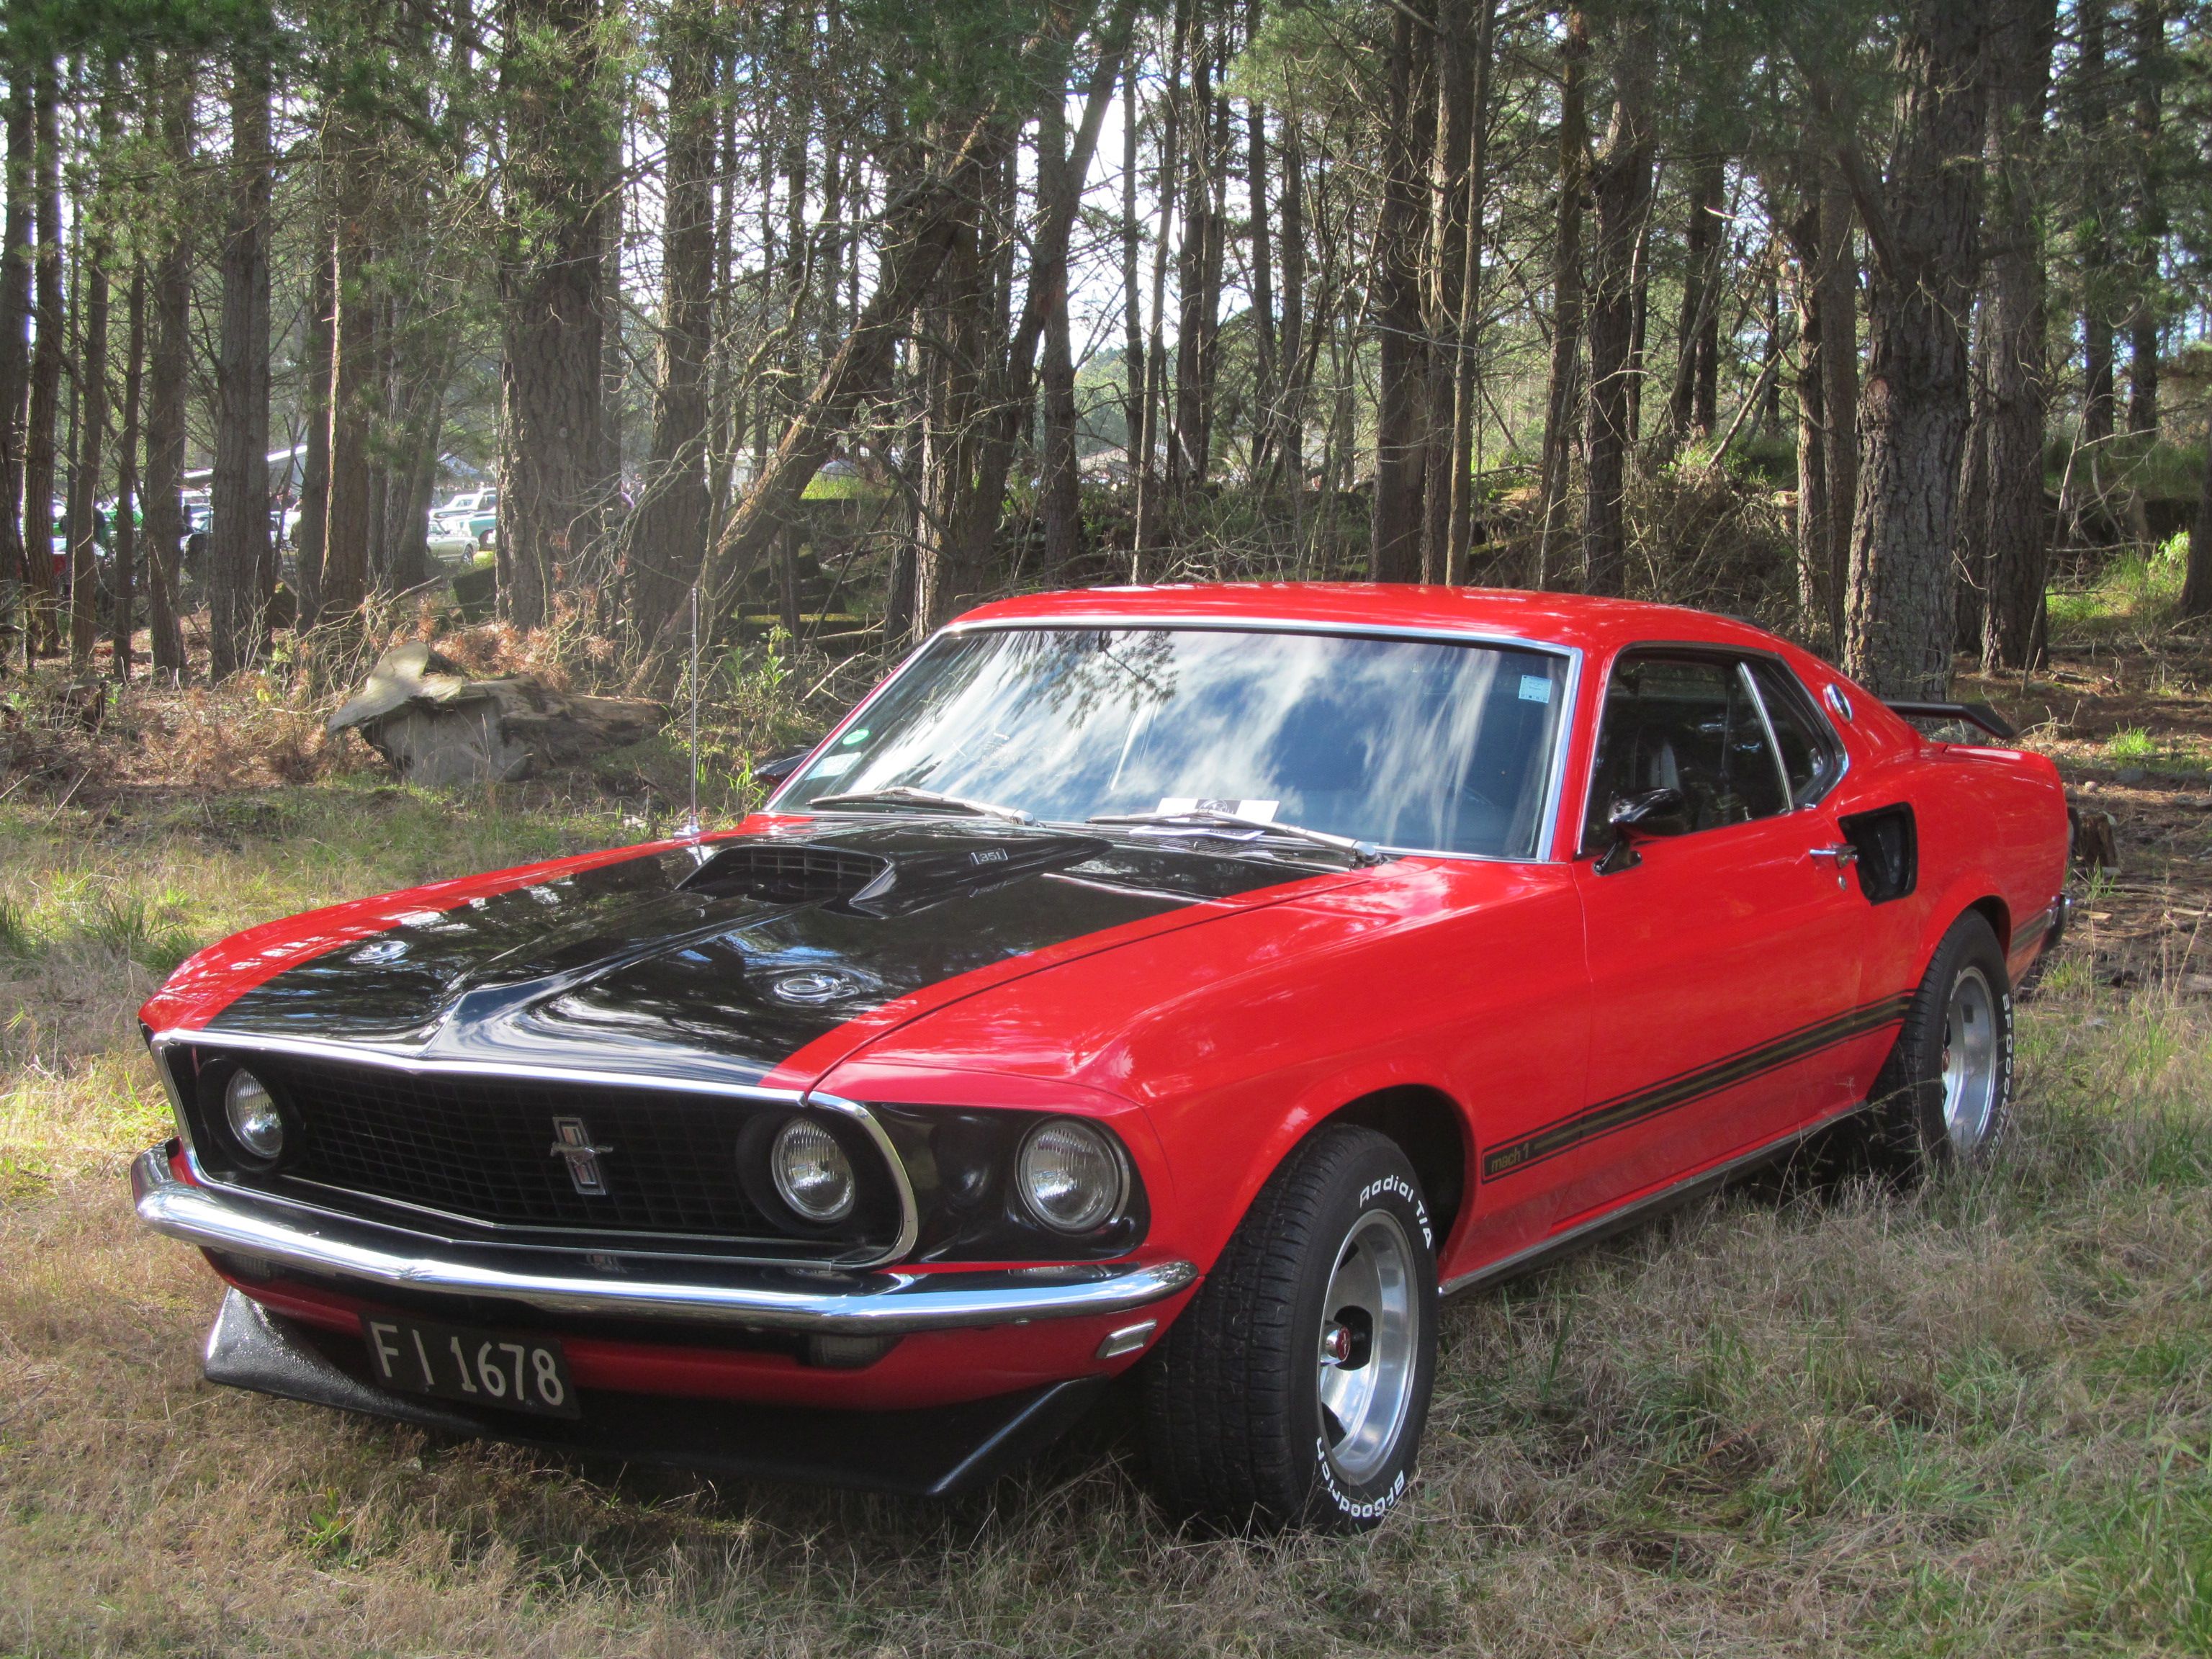 1969 Mustang Mach 1 Red And Black 